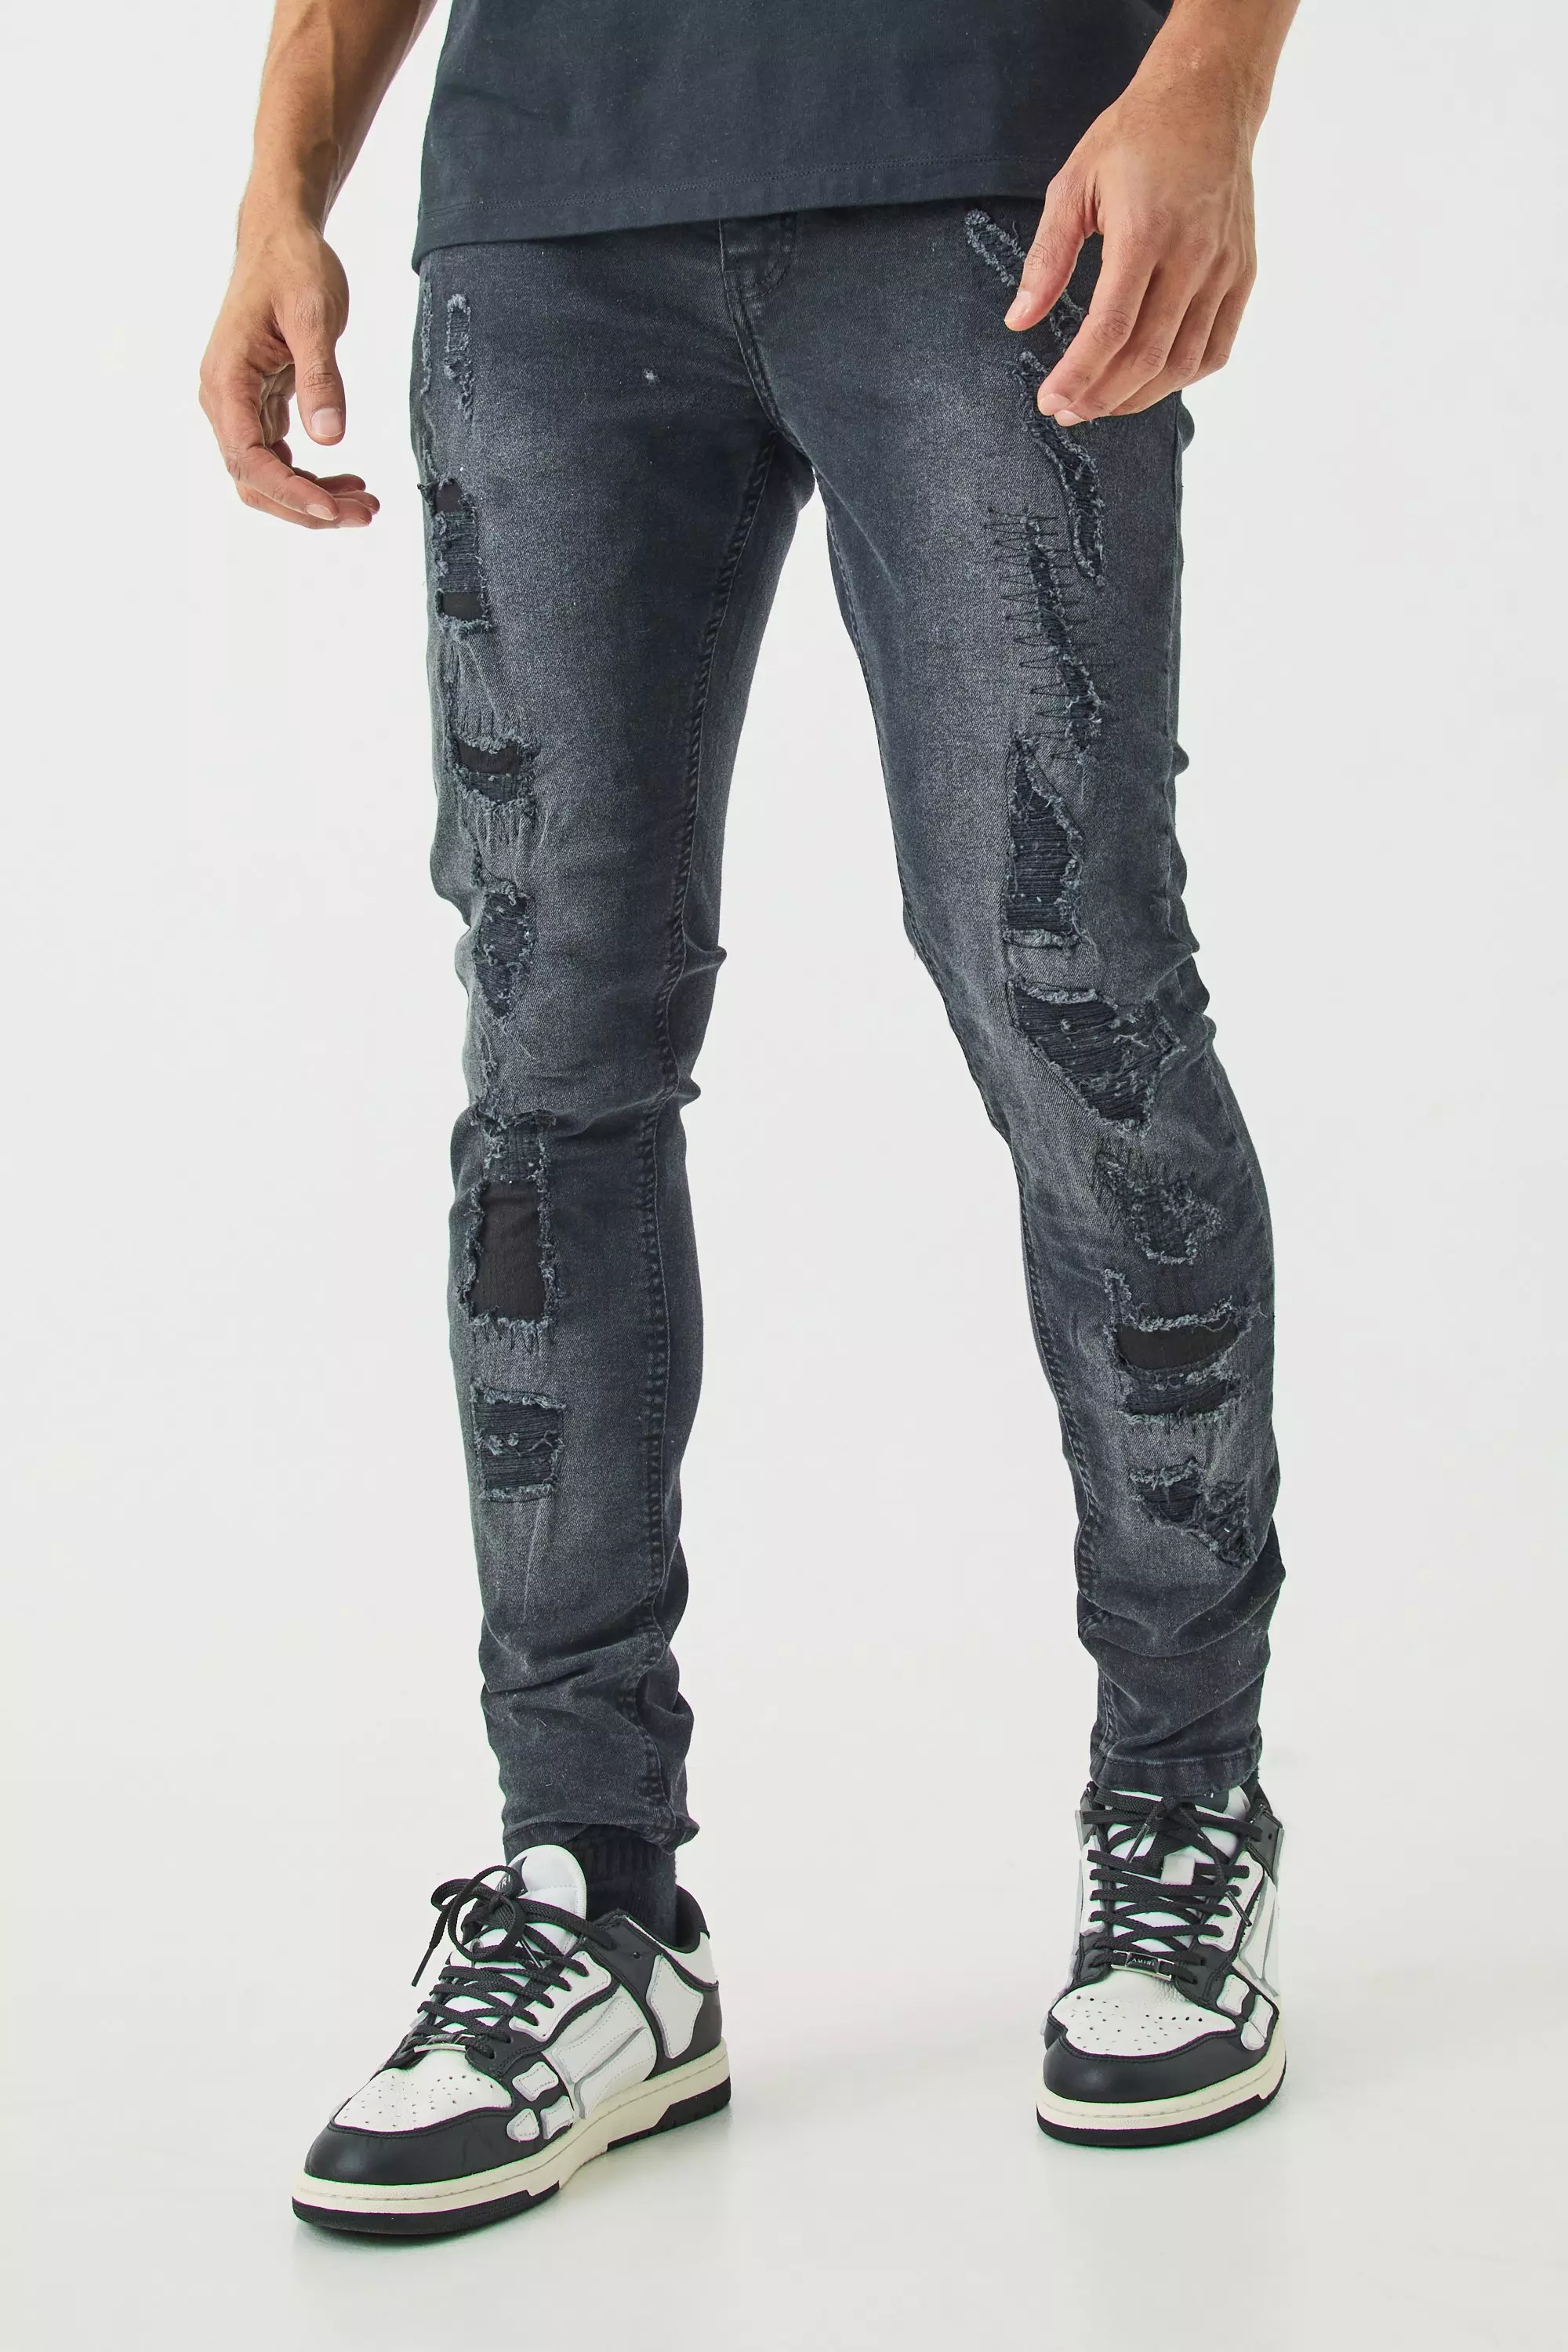 Ash Grey Skinny Stretch All Over Ripped Black Jeans